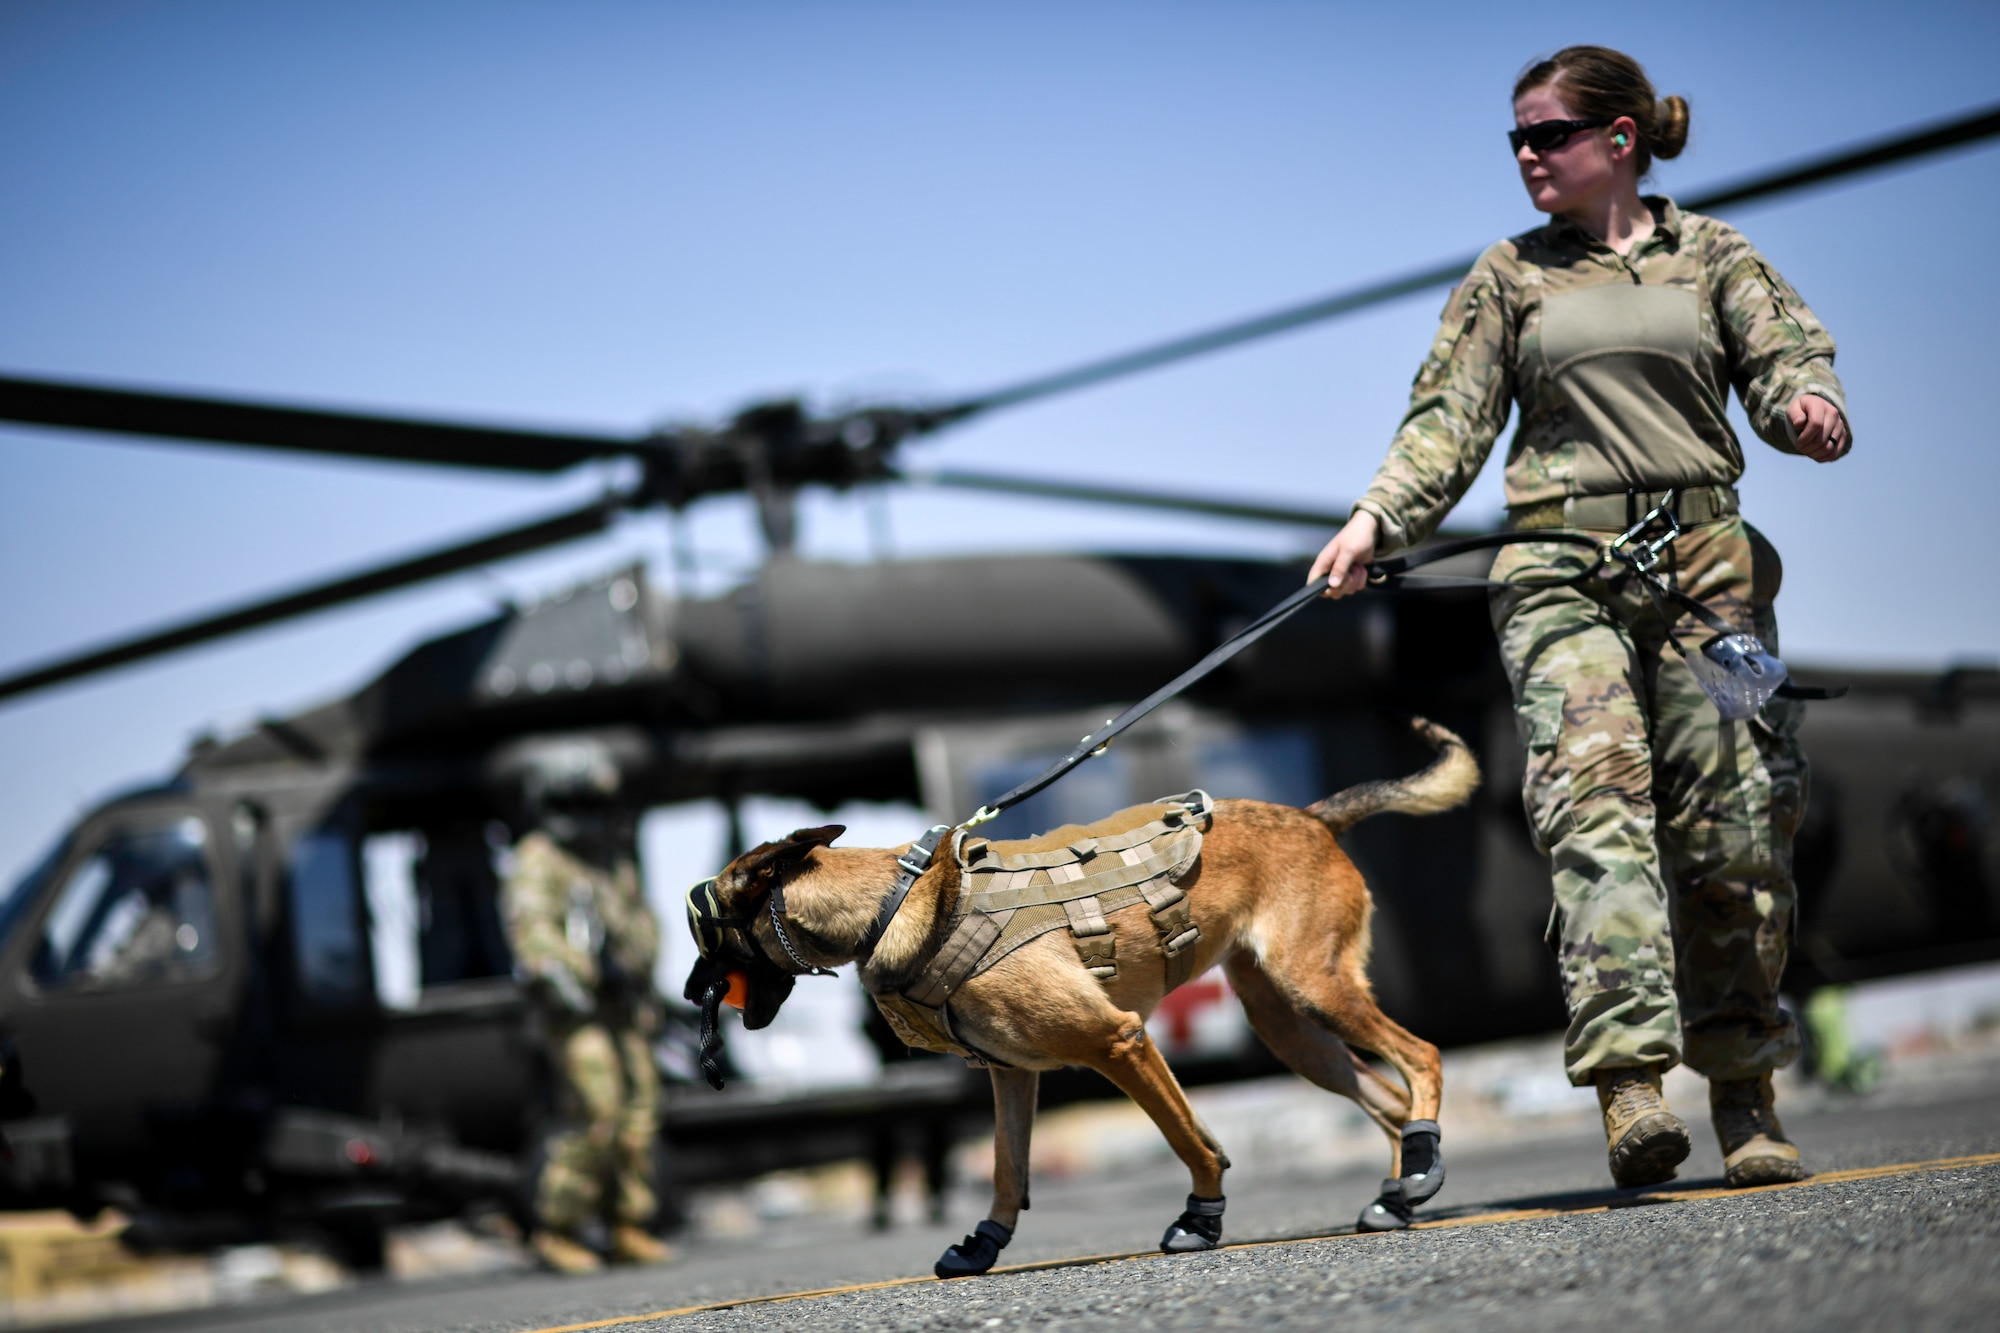 U.S. Air Force Staff Sgt. Kathyrn Malone, 386th Expeditionary Security Forces Squadron military working dog handler, and MWD UUrska, exit a UH-60 Black Hawk helicopter as part of medical evacuation training at Ali Al Salem Air Base, Kuwait, Sept. 13, 2019. The team participated in phase two of the exercise consisting of boarding the aircraft with the engines on. The objective was to get MWDs acclimated to the noise and wind created by the helicopter’s rotating blades. (U.S. Air Force photo by Staff Sgt. Mozer O. Da Cunha)